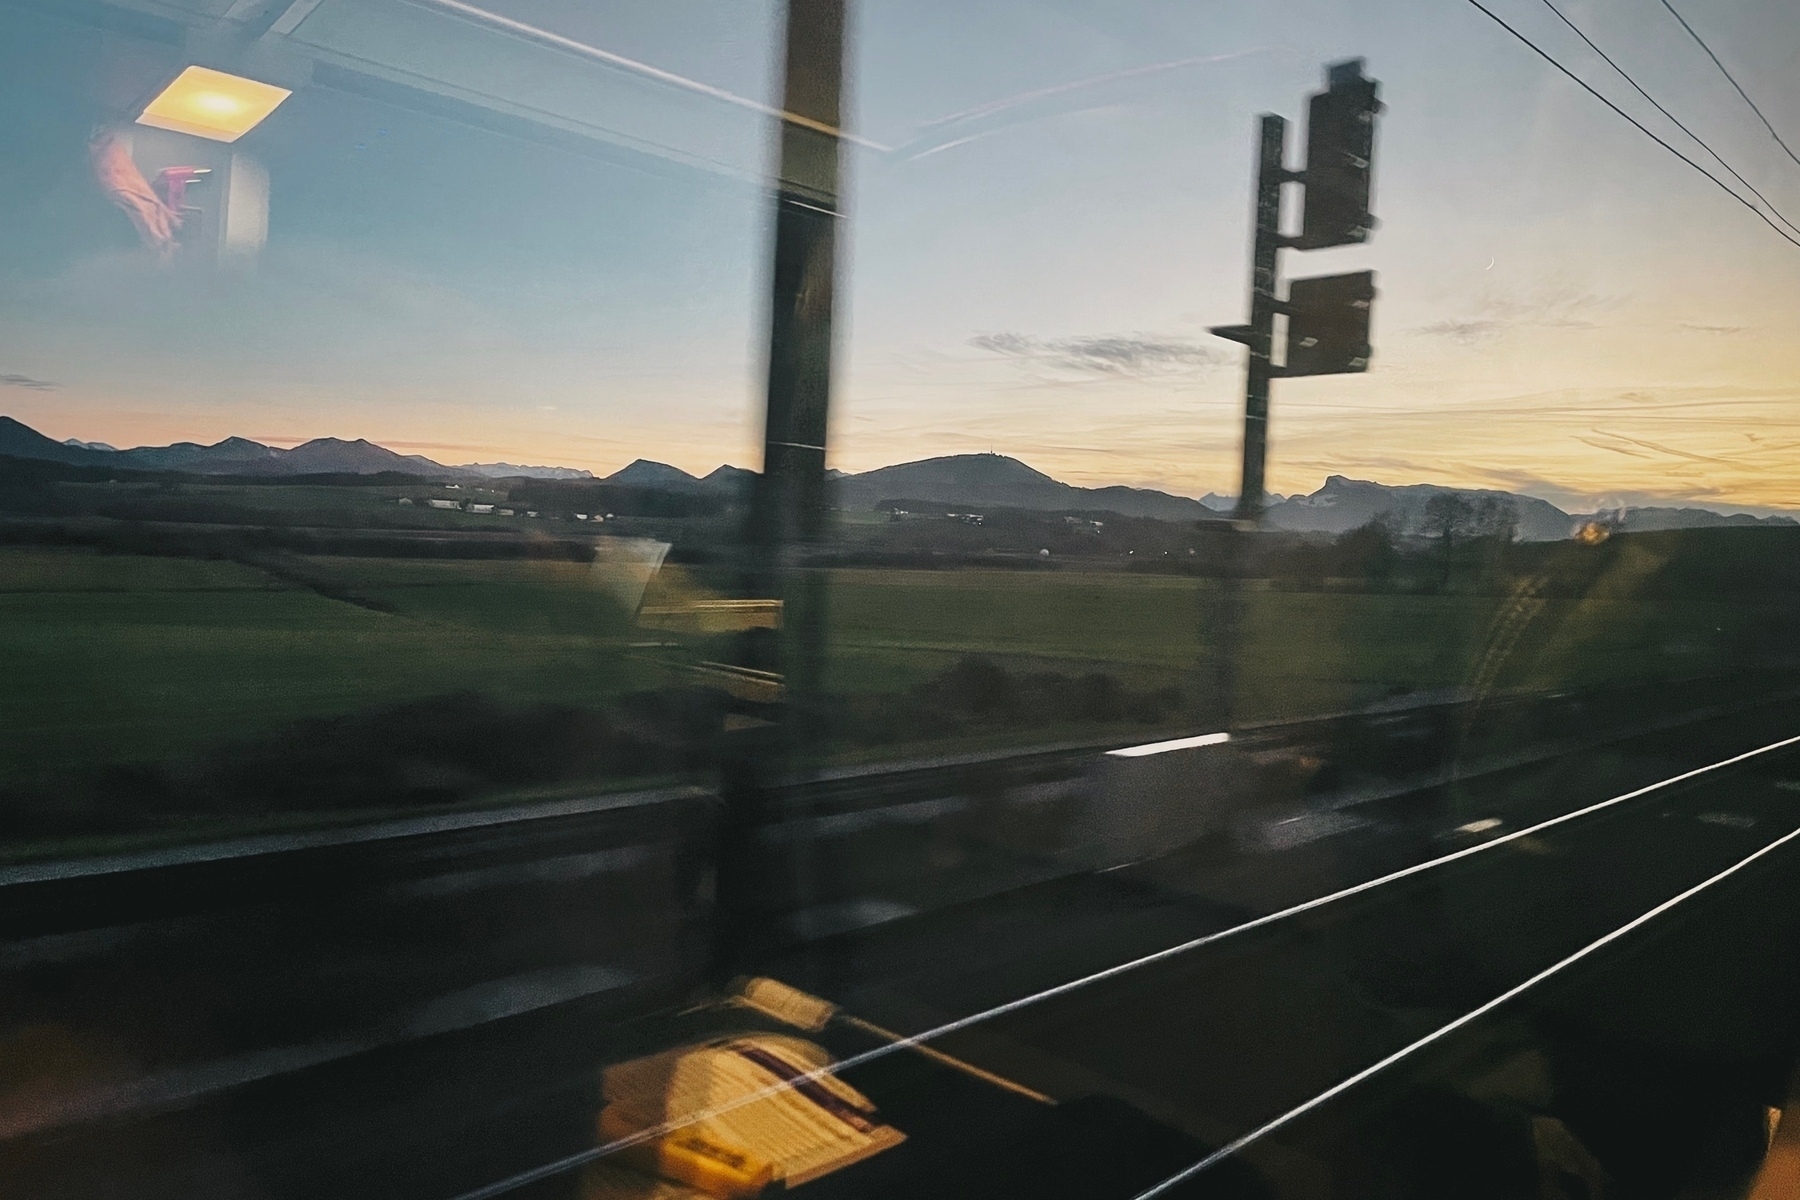 Taken from a moving train you see mountains in the distance, a bit after sundown; in the foreground you see train tracks and signs and in the reflection of the glass a book and pen